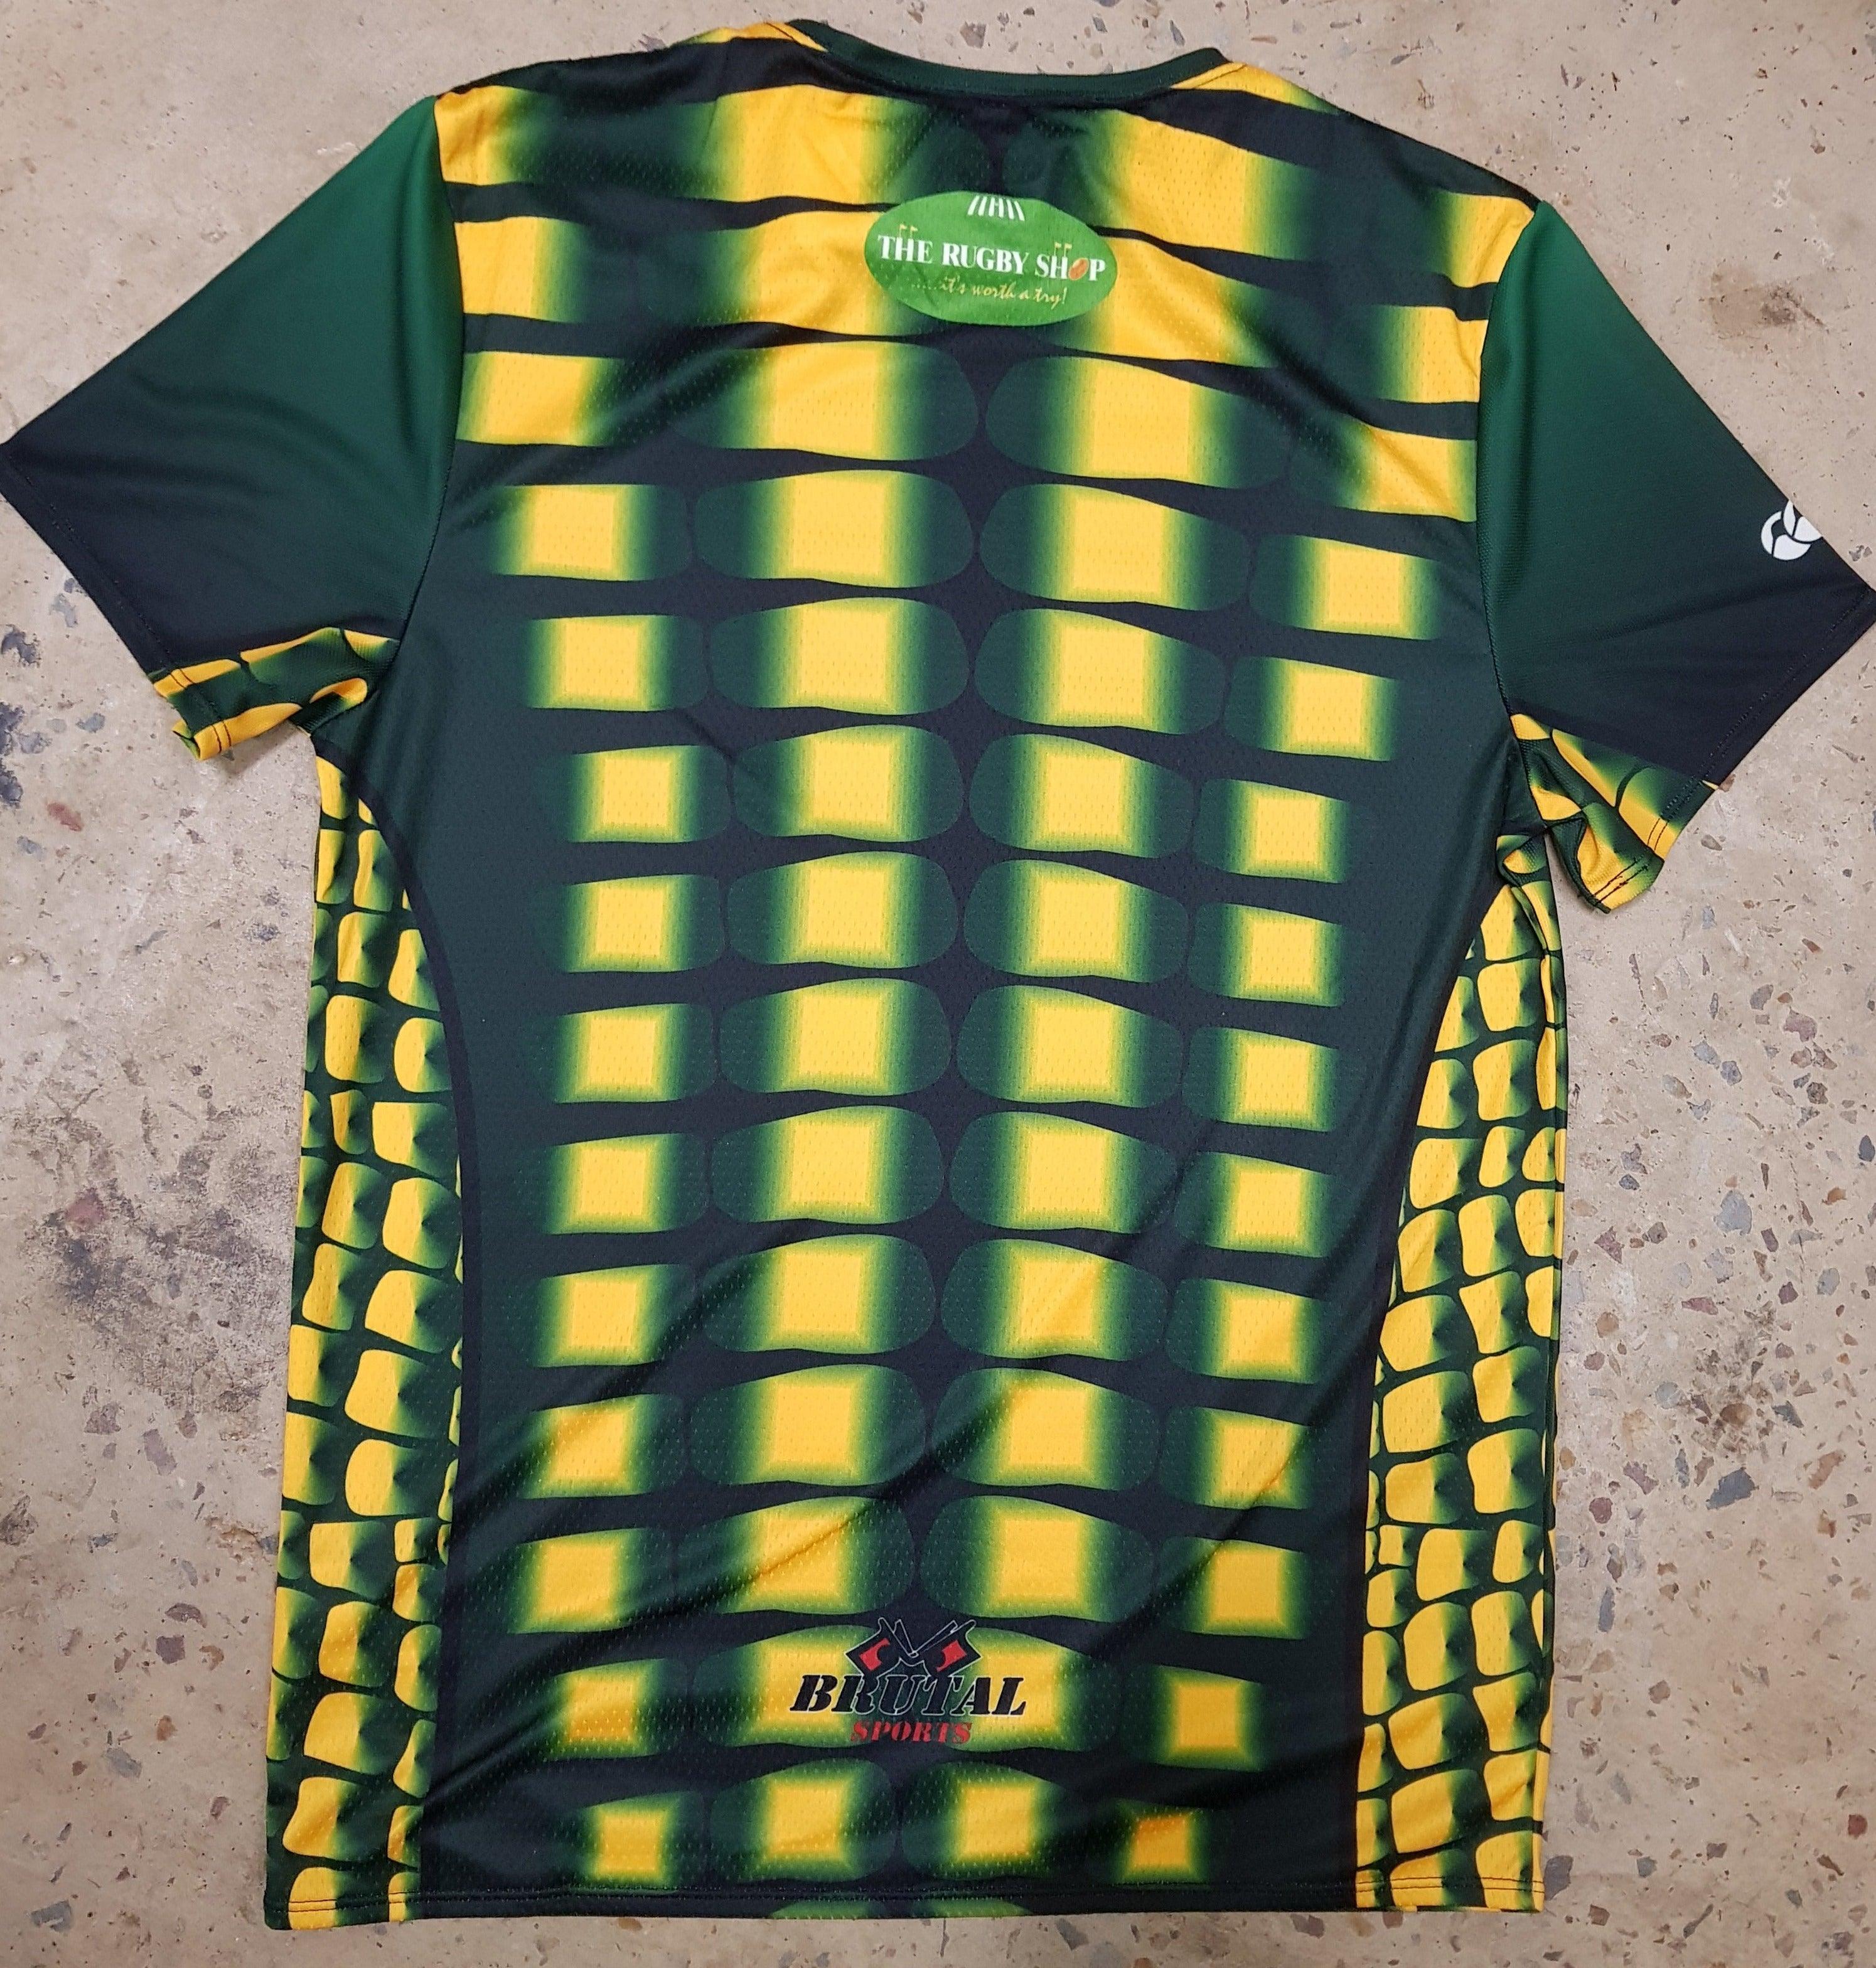 Croc & Roll Rugby Tee - The Rugby Shop Darwin